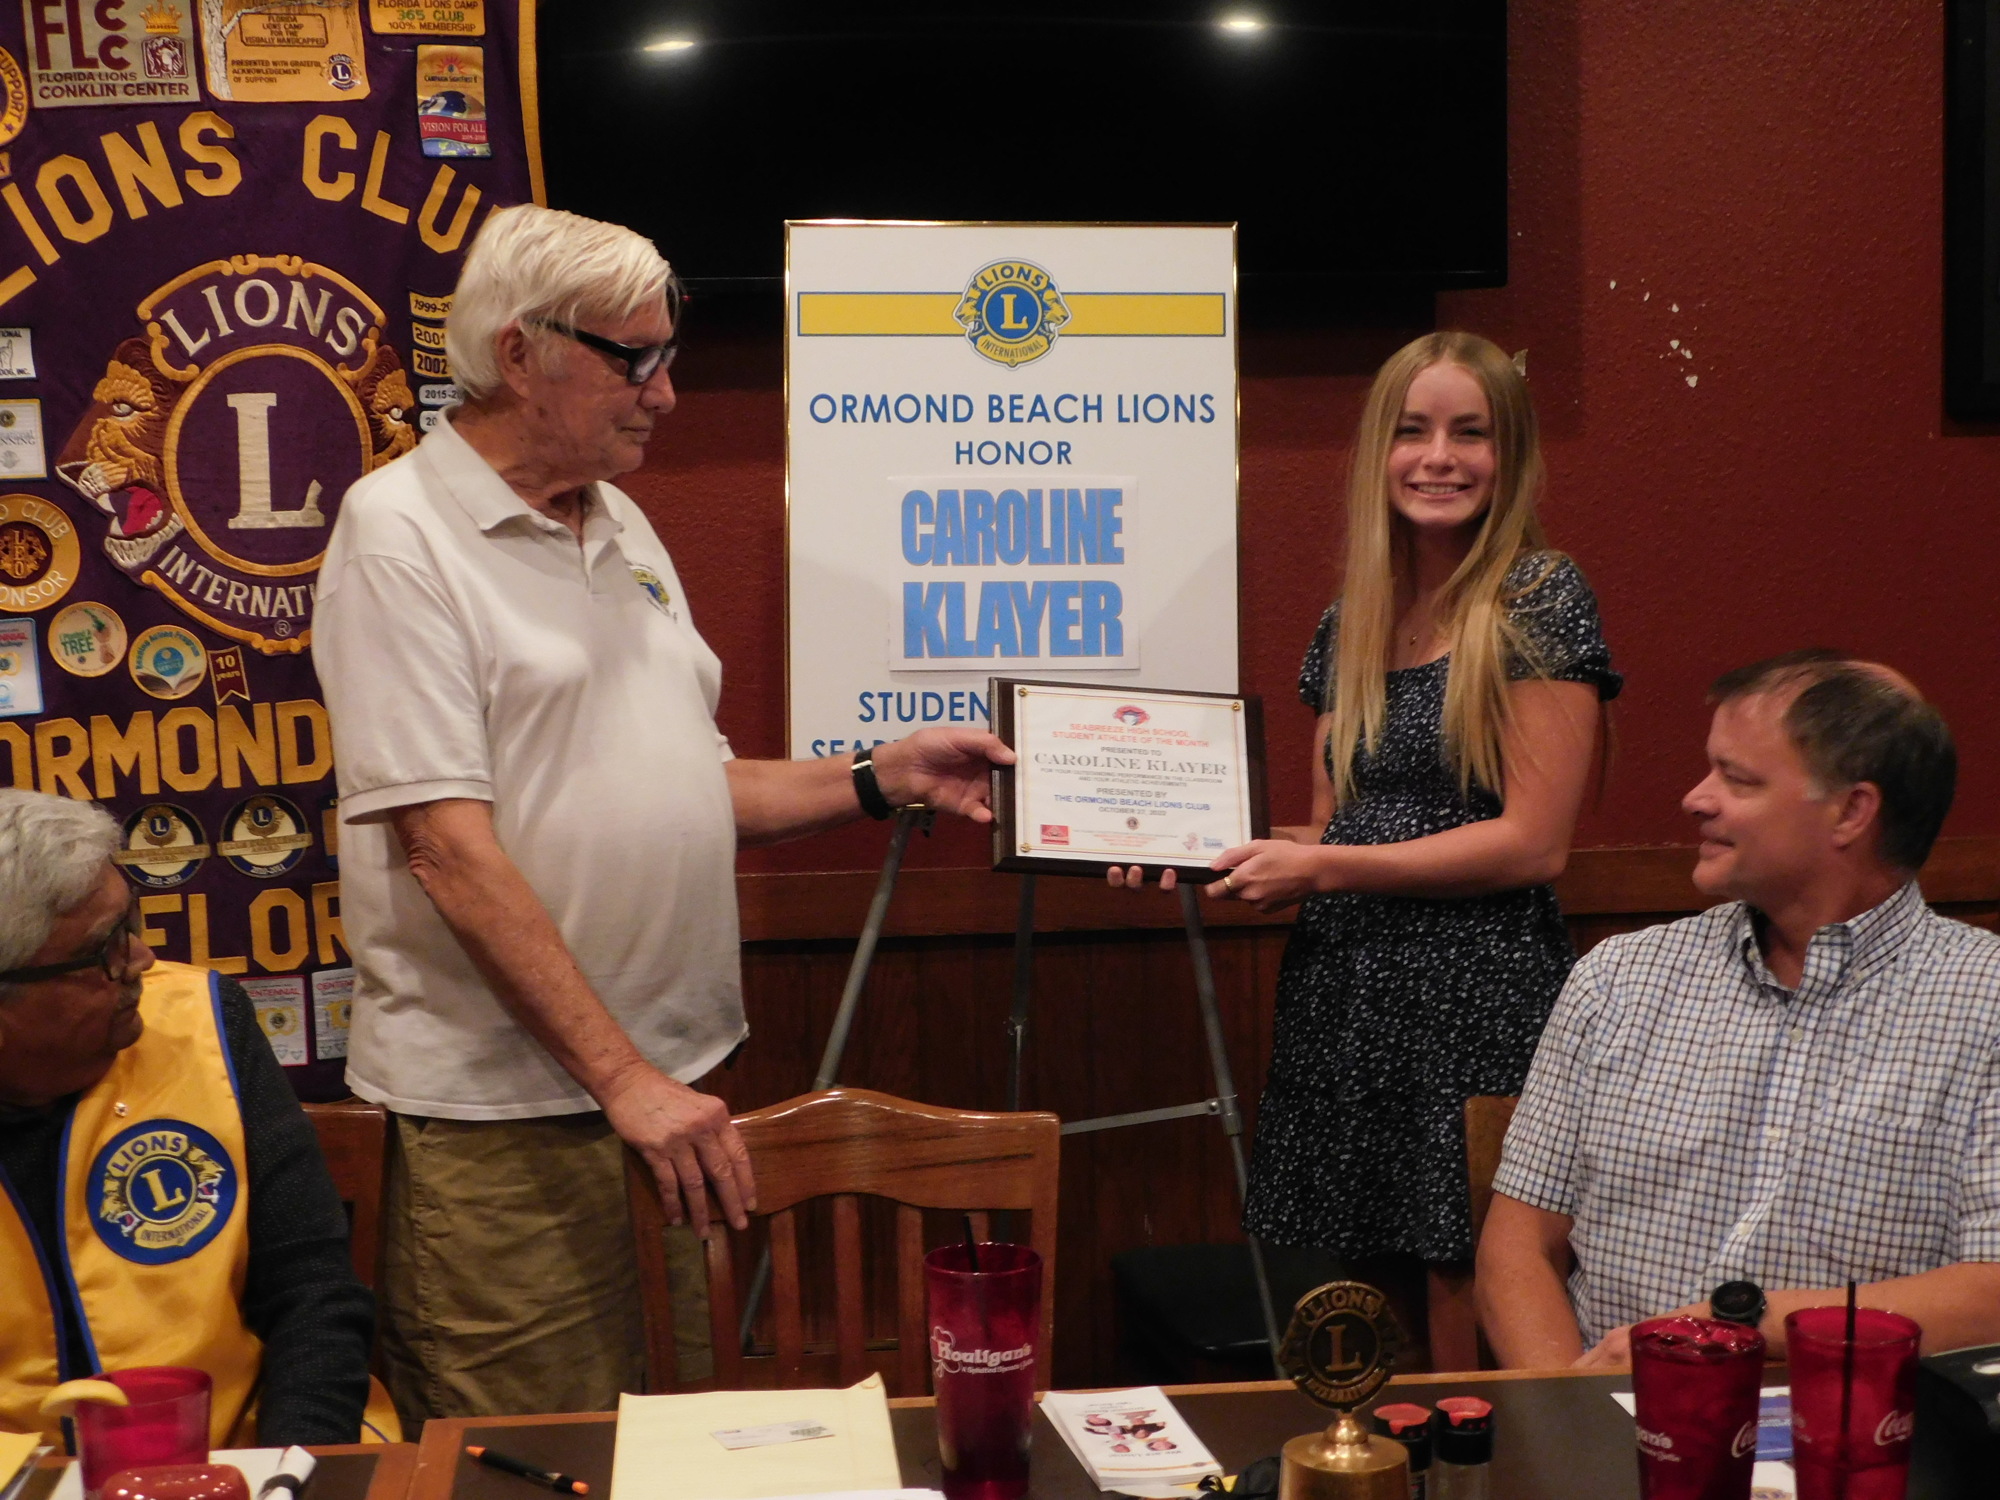 Hank Lunsford, president of the Ormond Beach Lions Club, presents Caroline Klayer with a plaque. Courtesy photo